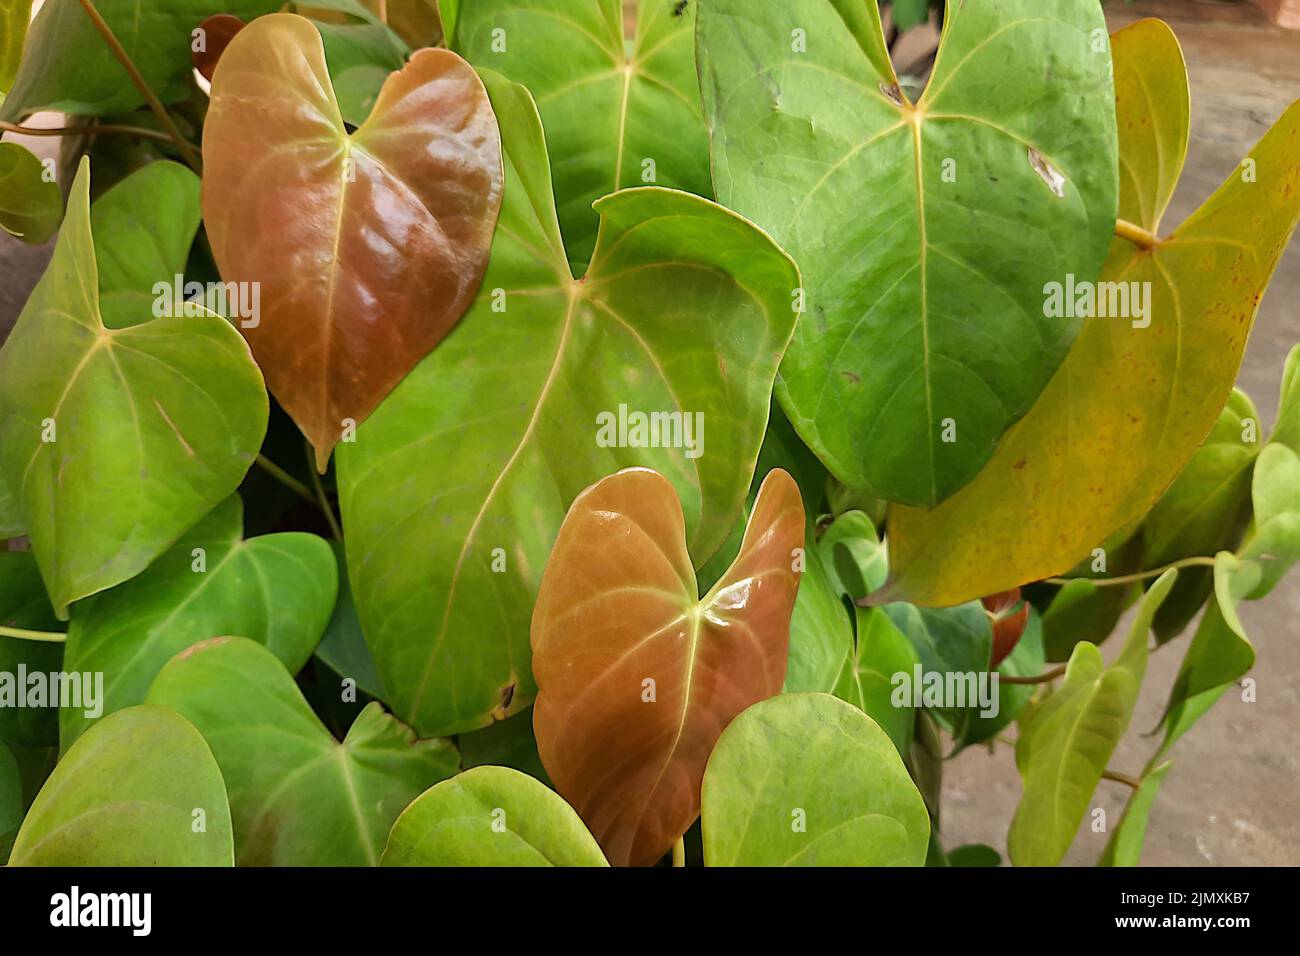 View of orange tender and green ripe leaves of Anthurium androecium plant Stock Photo